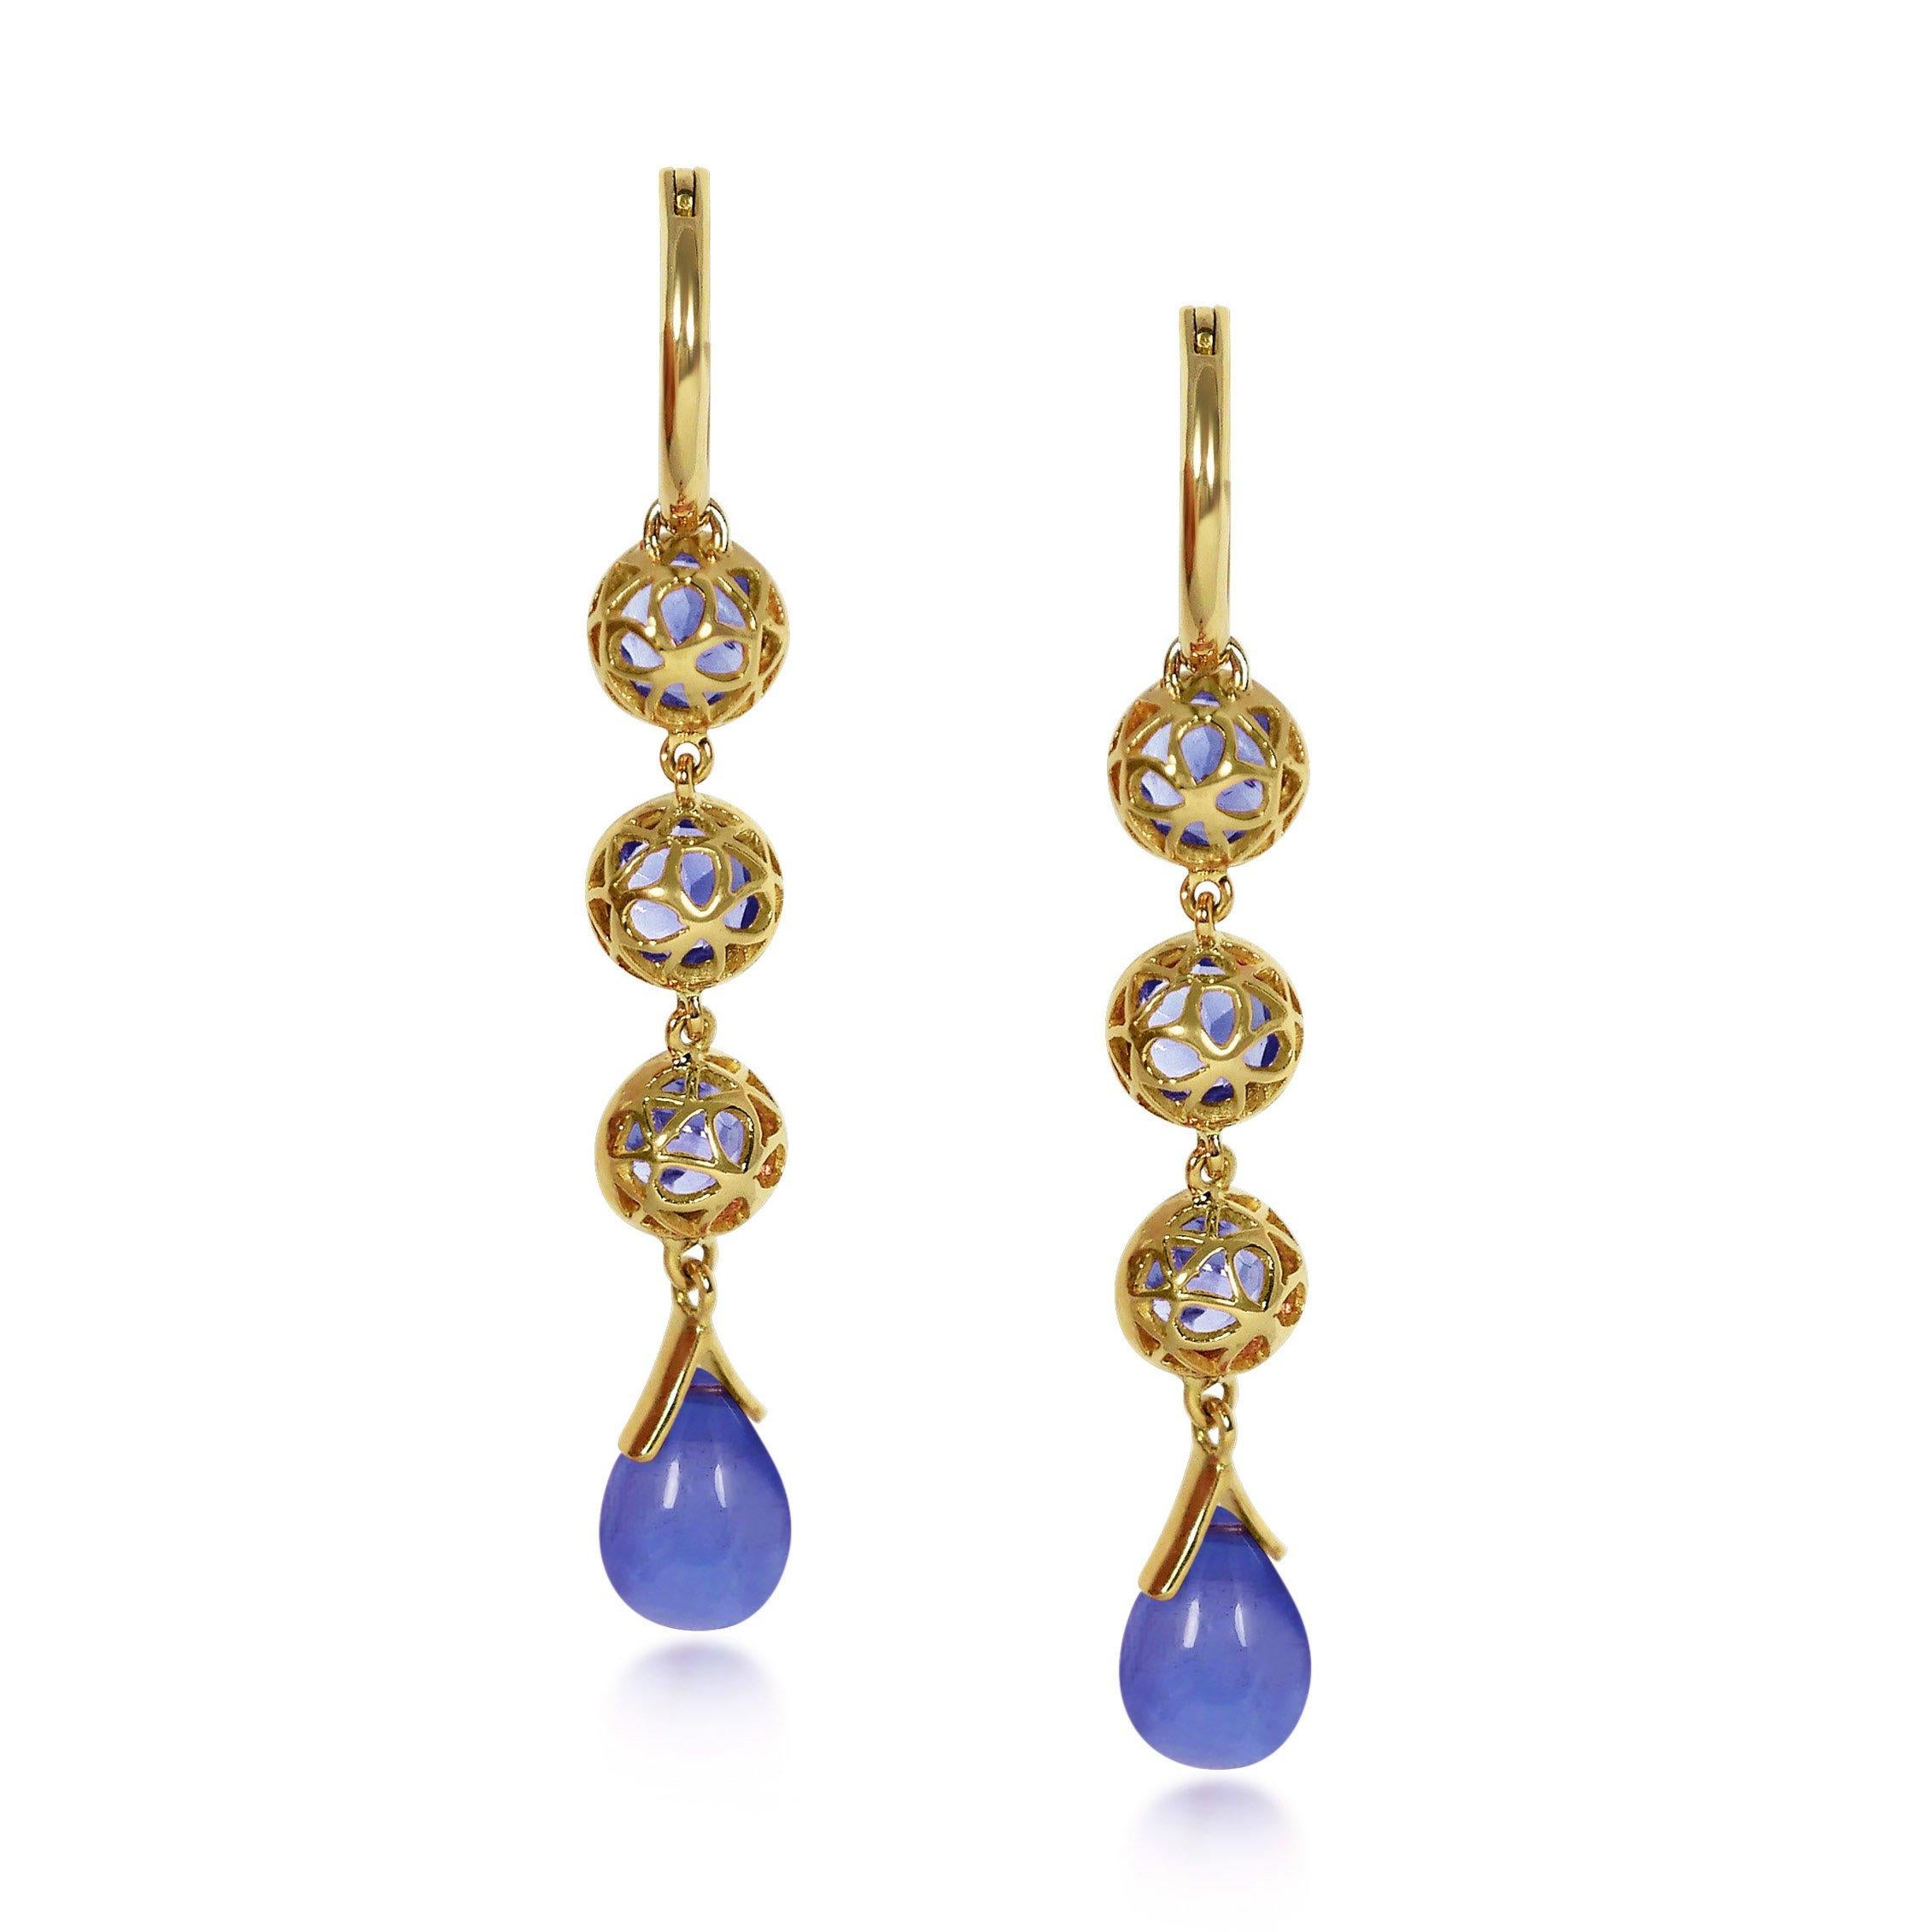 Brilliant Cut Handcrafted 1.65 Carats Tanzanites 18 Karat Yellow Gold Drop Earrings For Sale